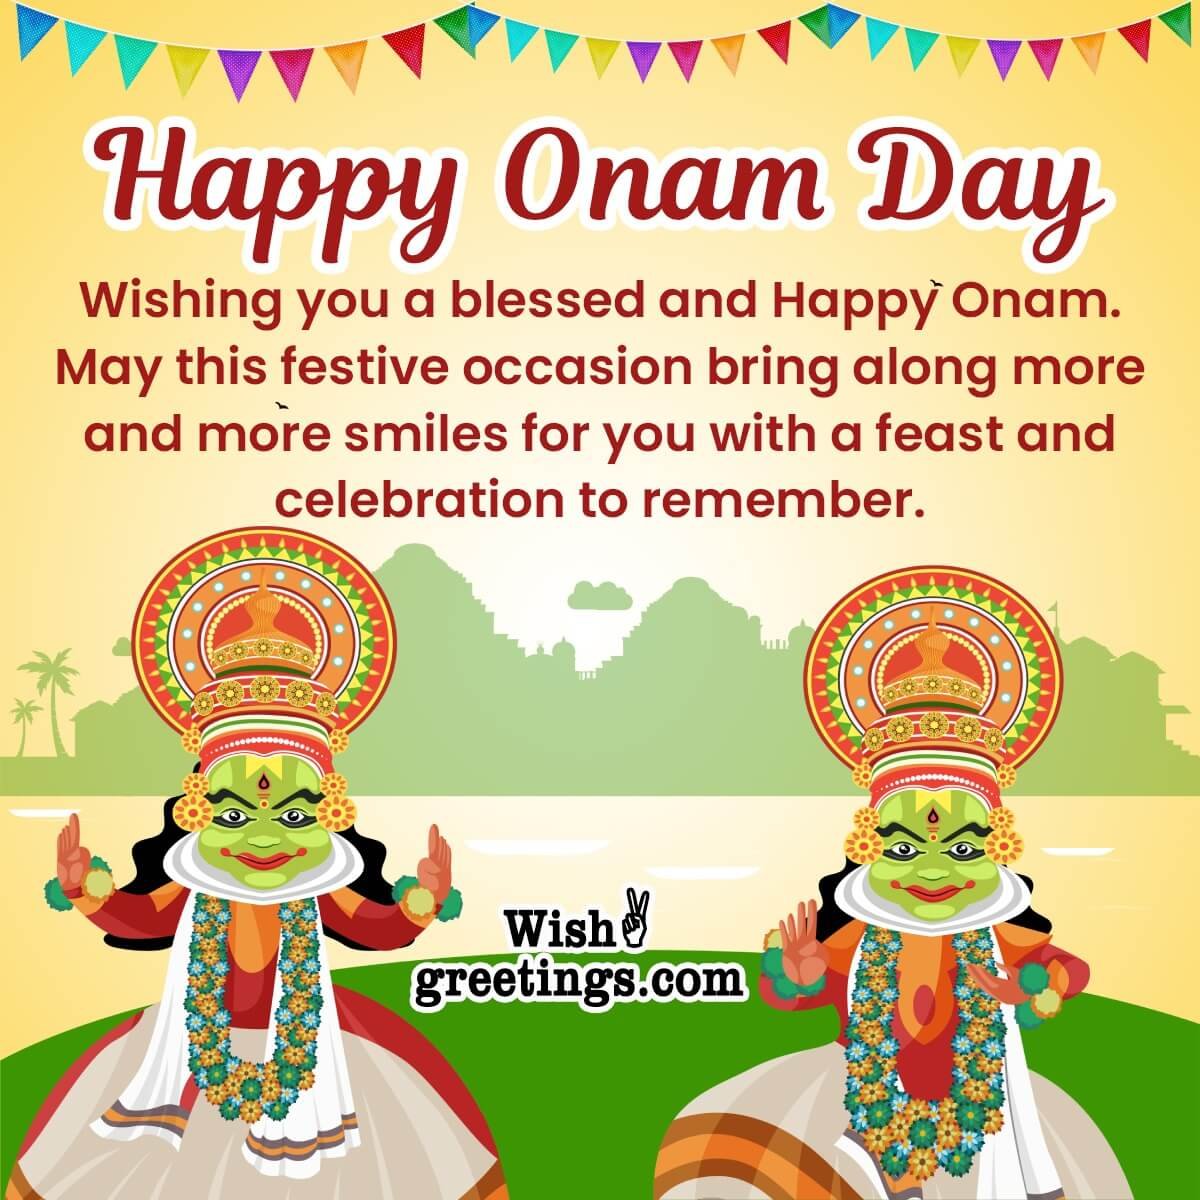 Wishing You A Blessed And Happy Onam